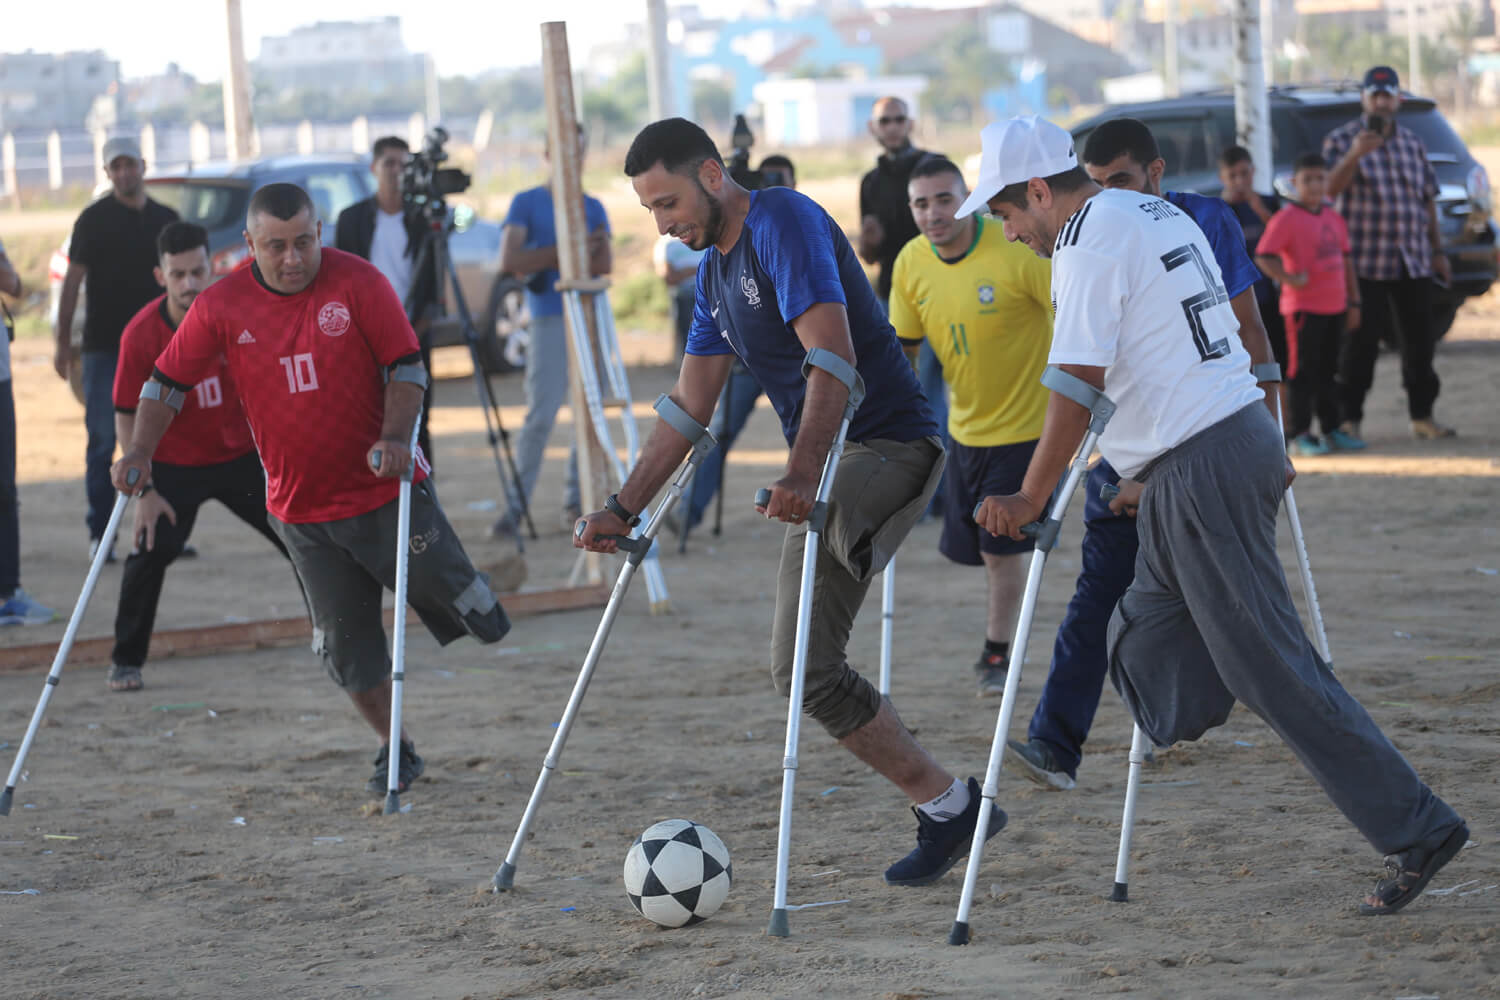 Gaza soccer players with amputations, photo by Mohammed Asad. 2018